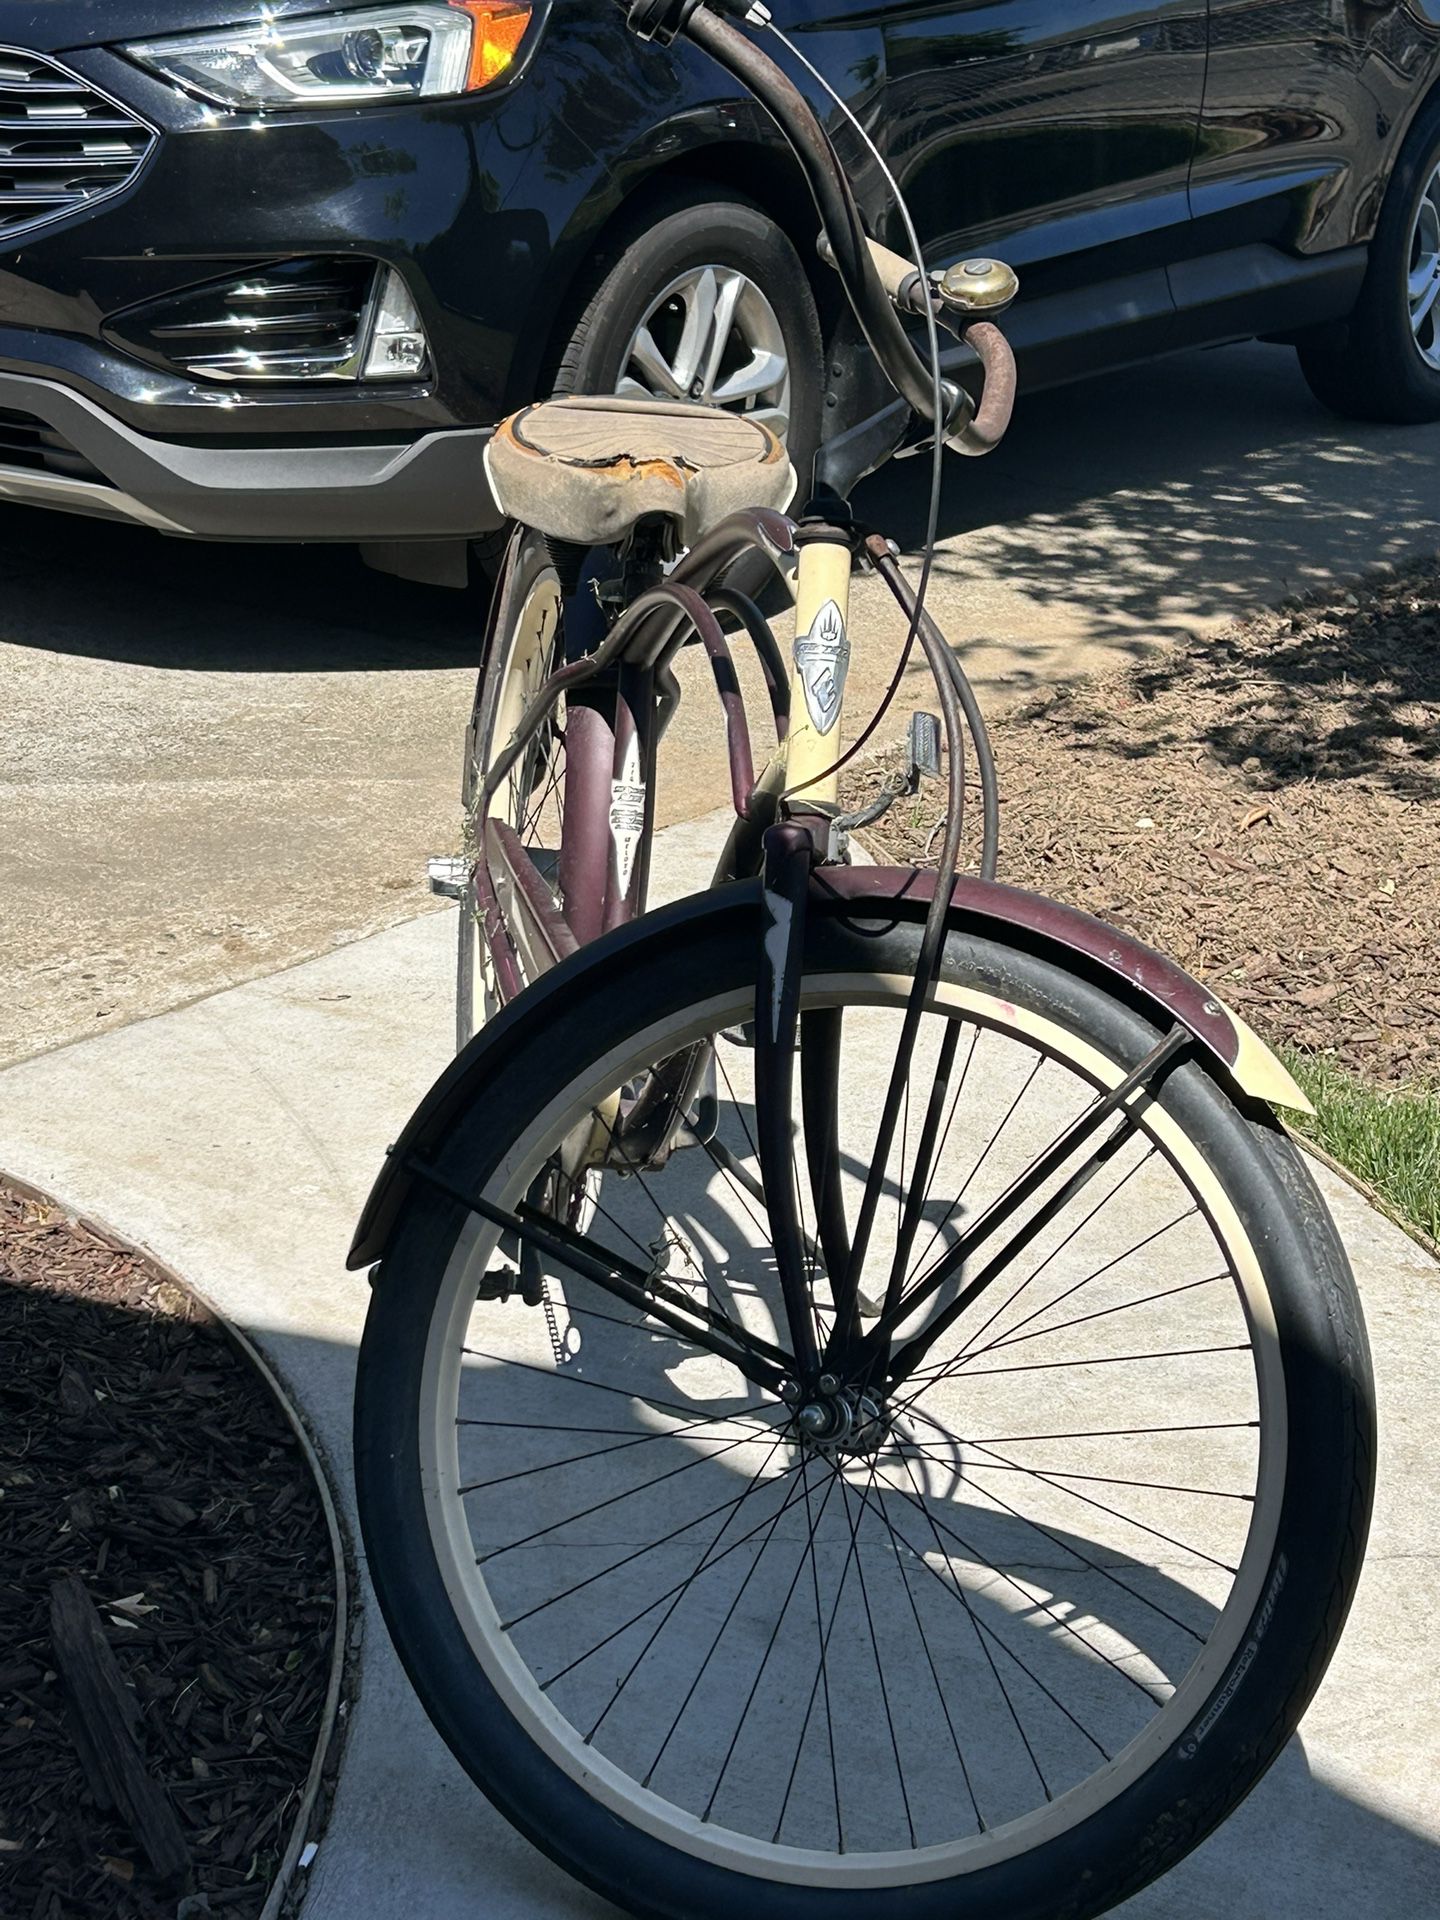 Electra Deluxe Ride Bicycle 